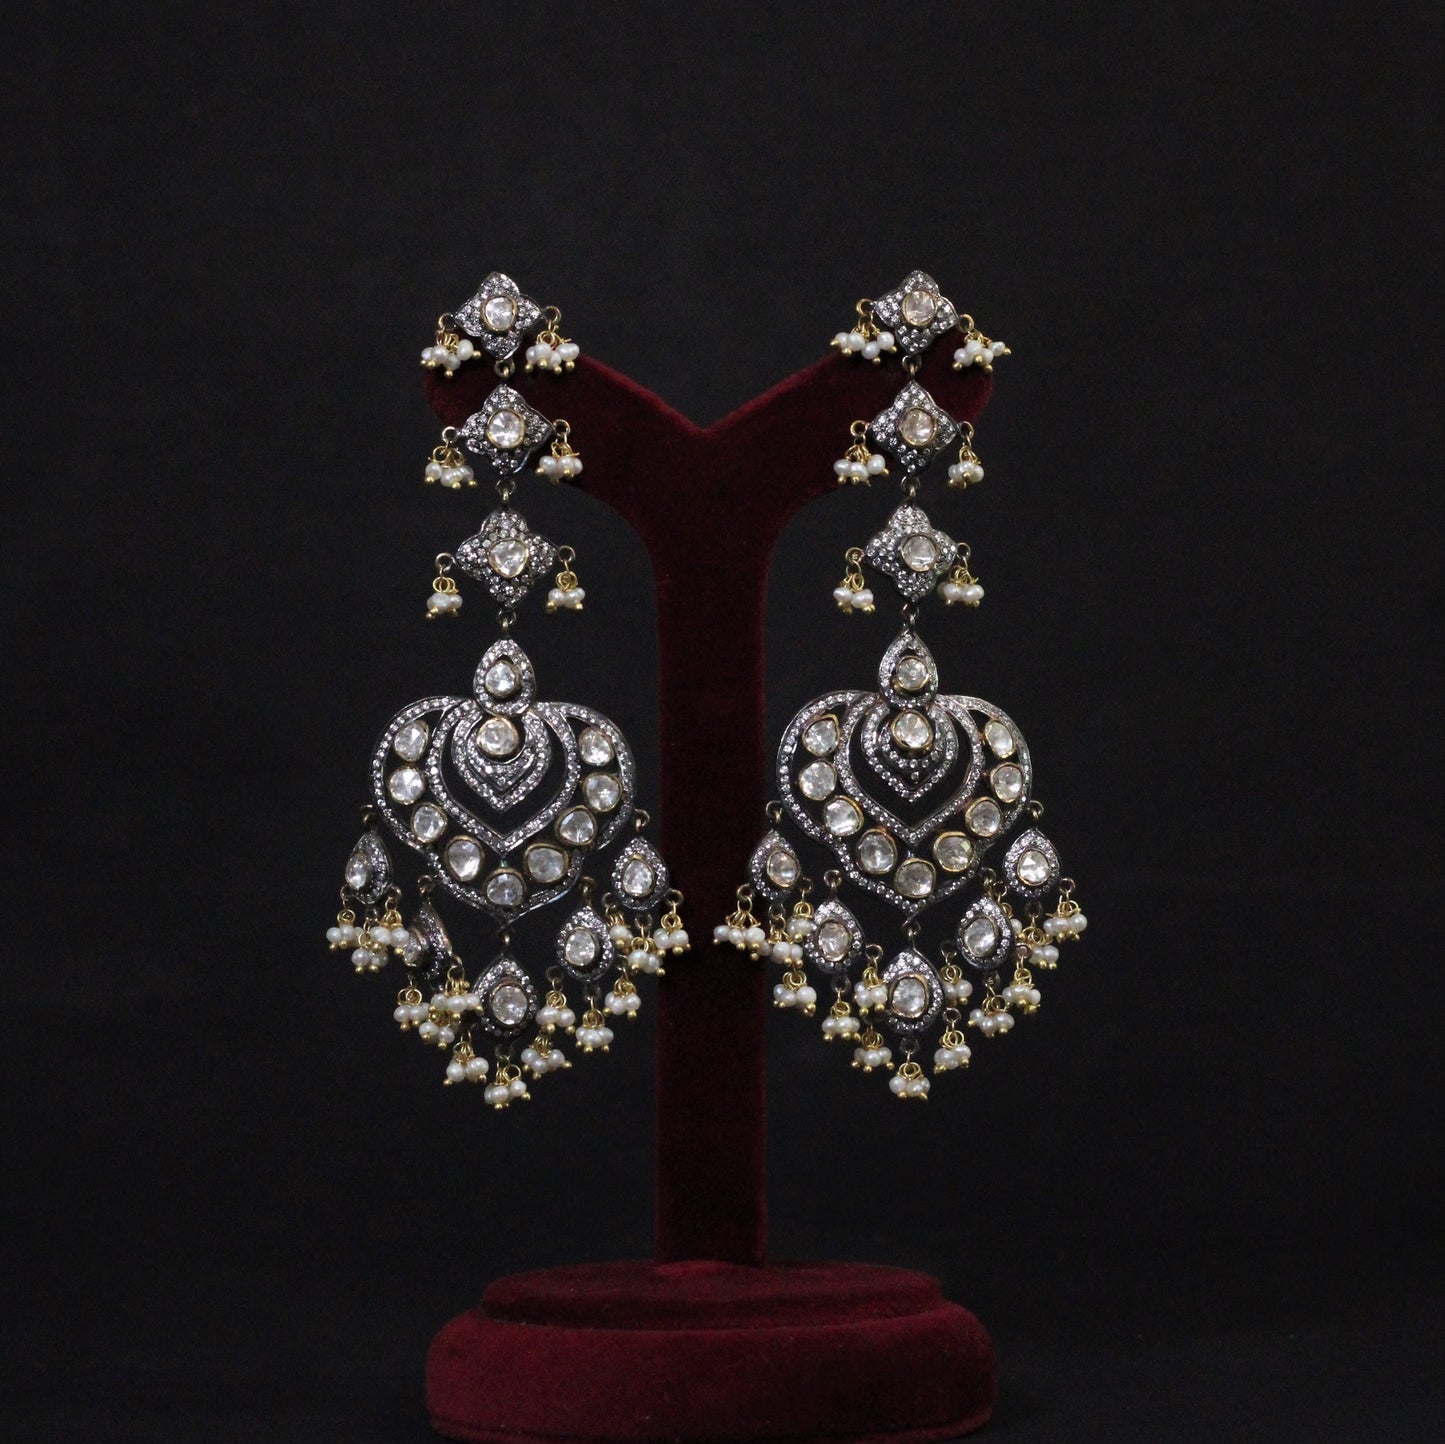 GOLD & BLACK RHODIUM PLATING DANGLERS EARRINGS IN HYDRABADI COLLECTIONS.